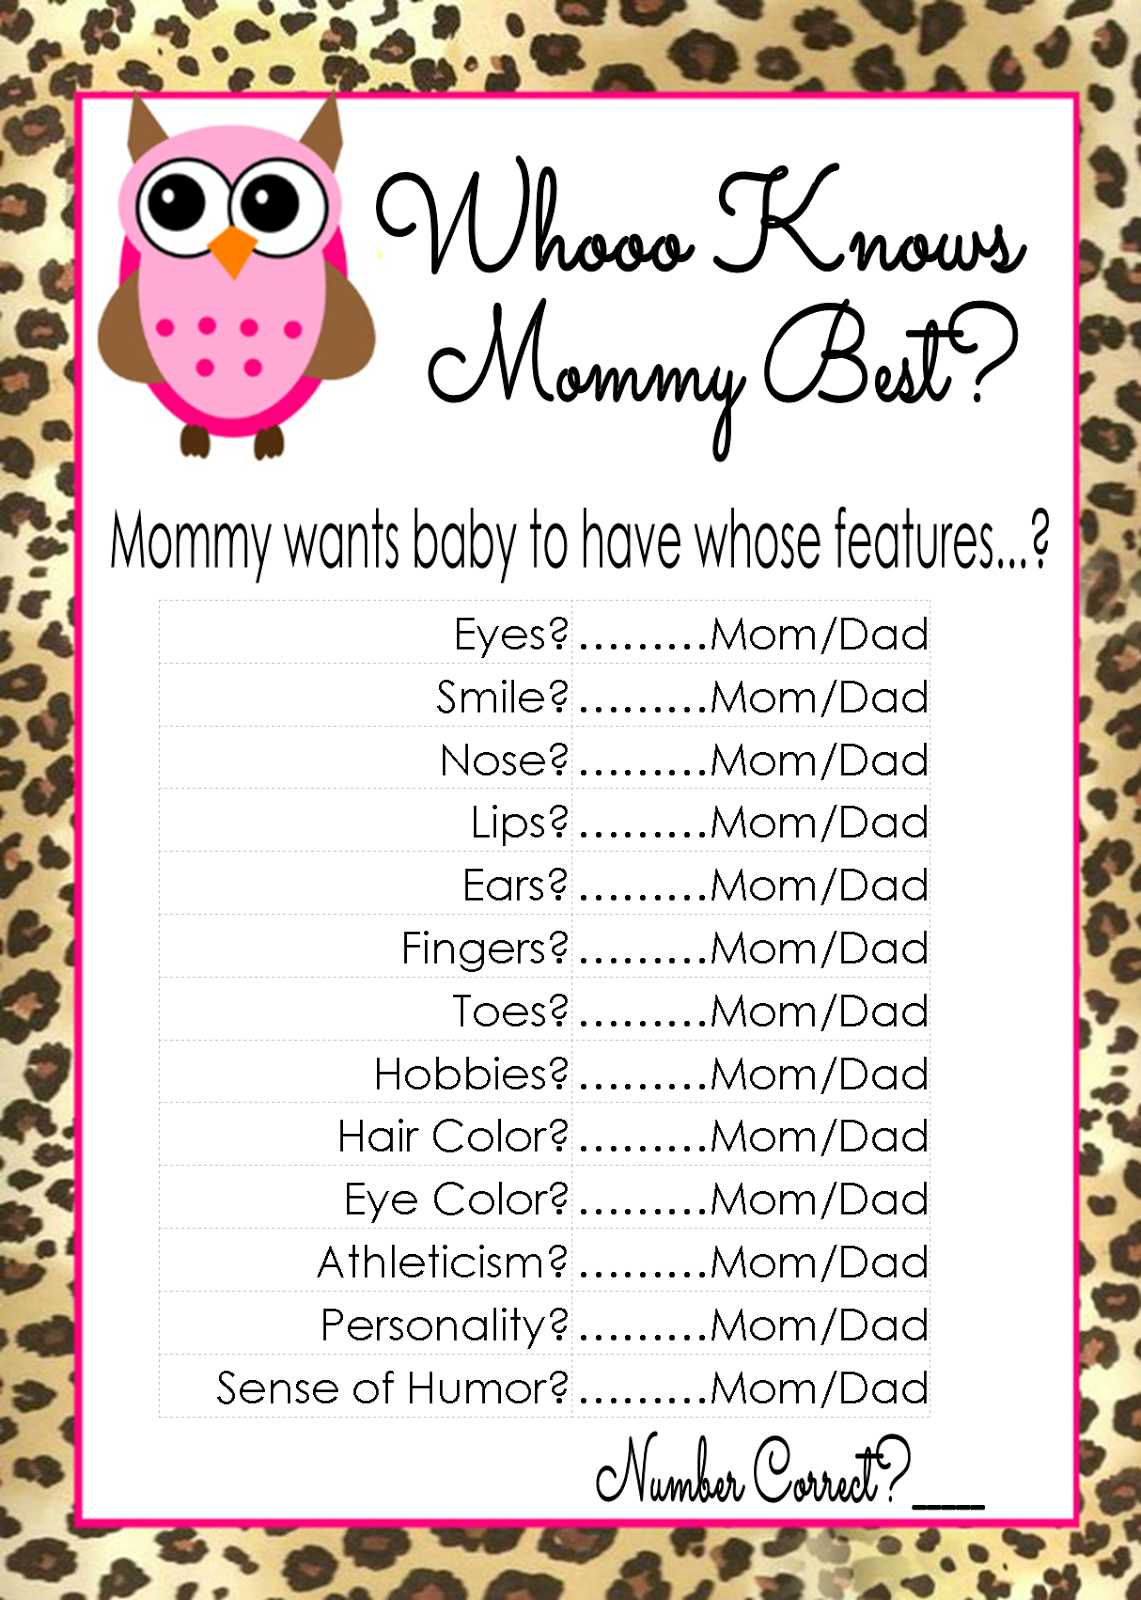 Who Knows Mommy Best Free Printable (81+ Images In Collection) Page 2 - Who Knows Mommy And Daddy Best Free Printable